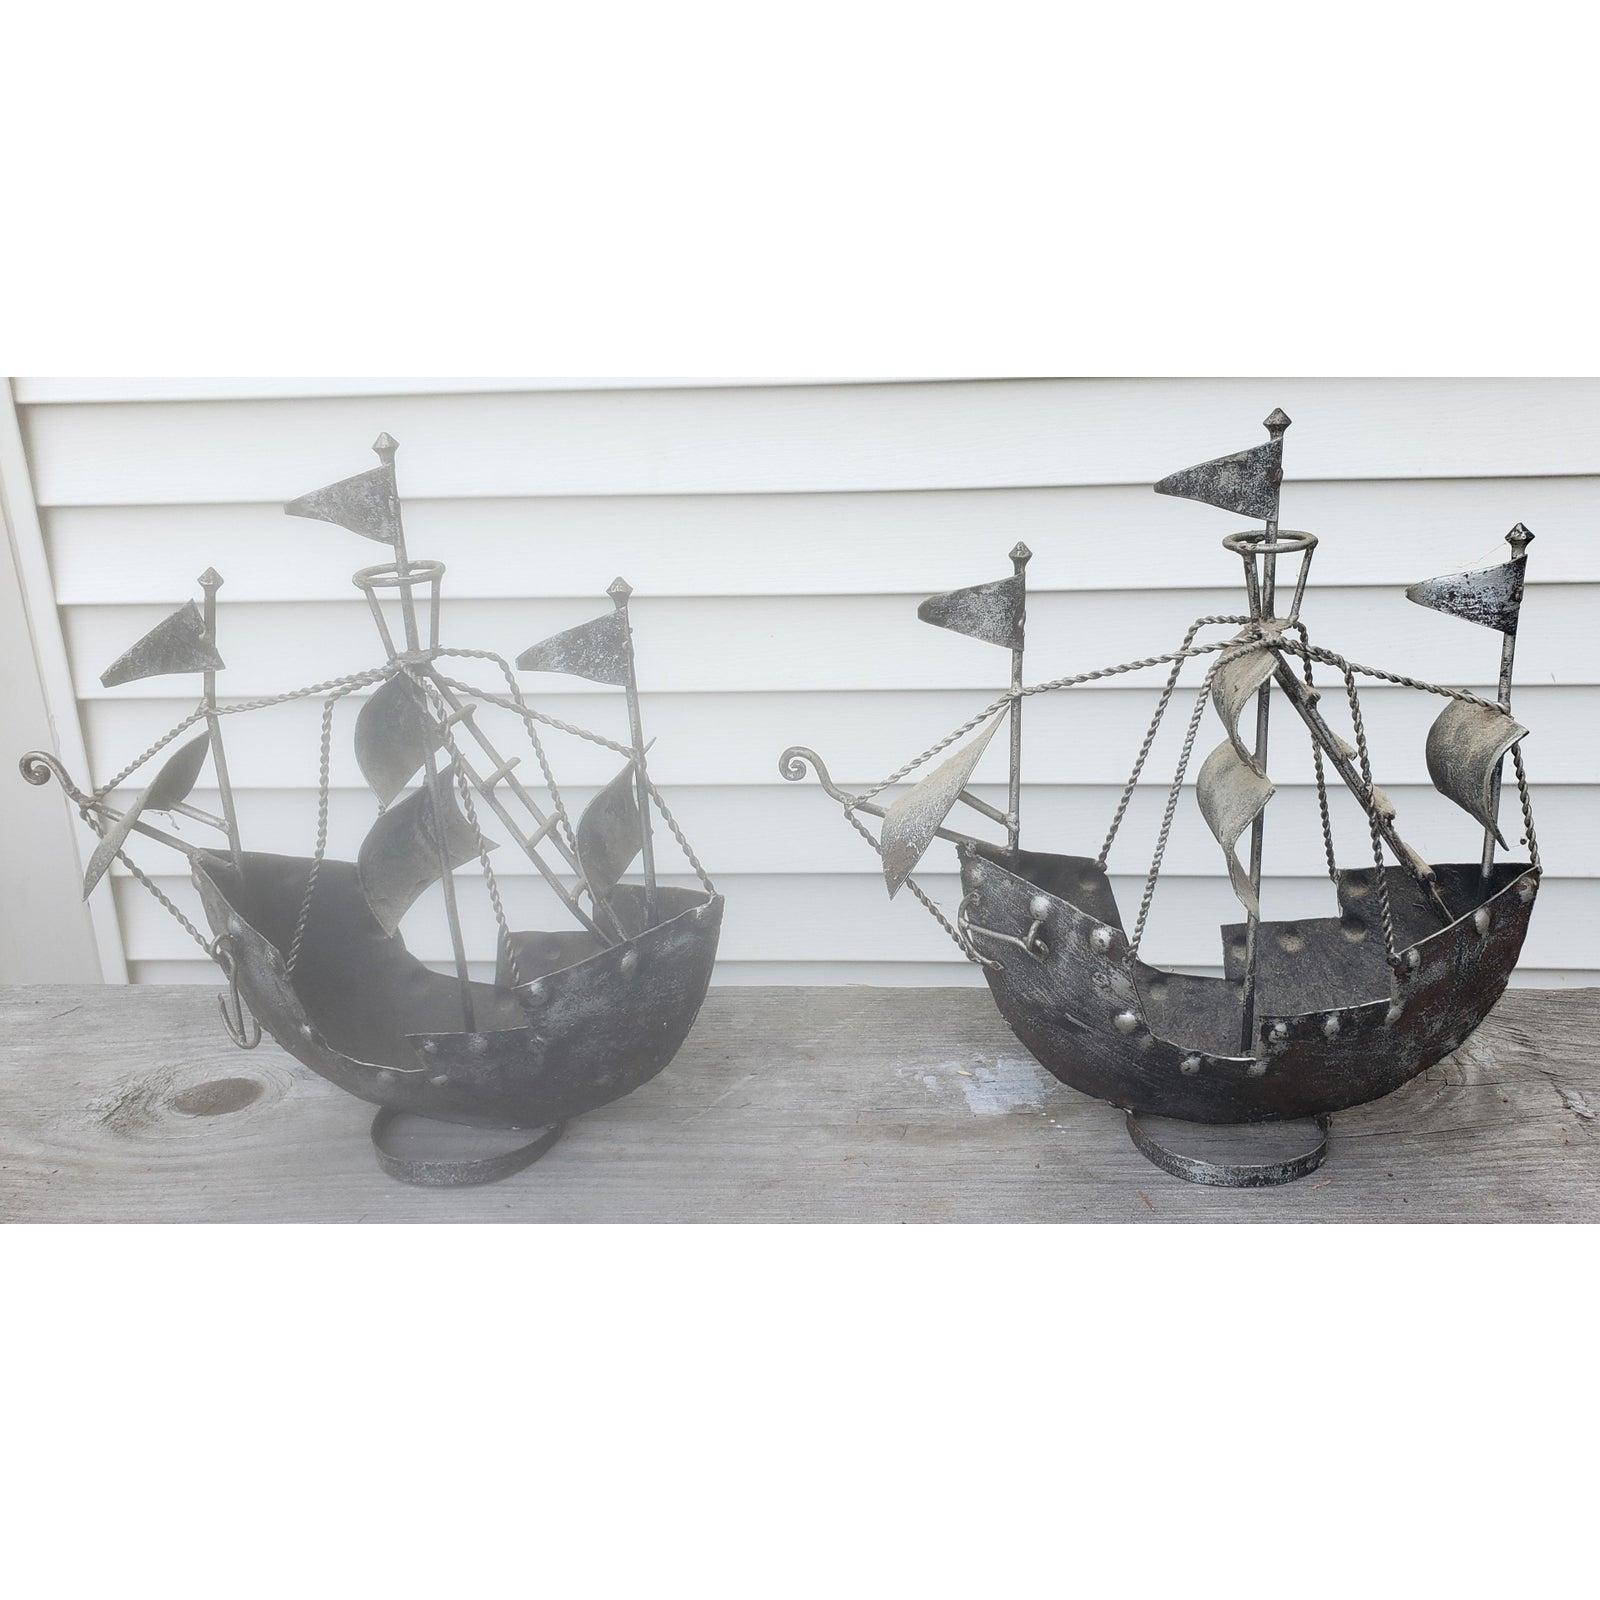 Hand Forged Iron Decorative Sailing Ships, a Pair For Sale 4